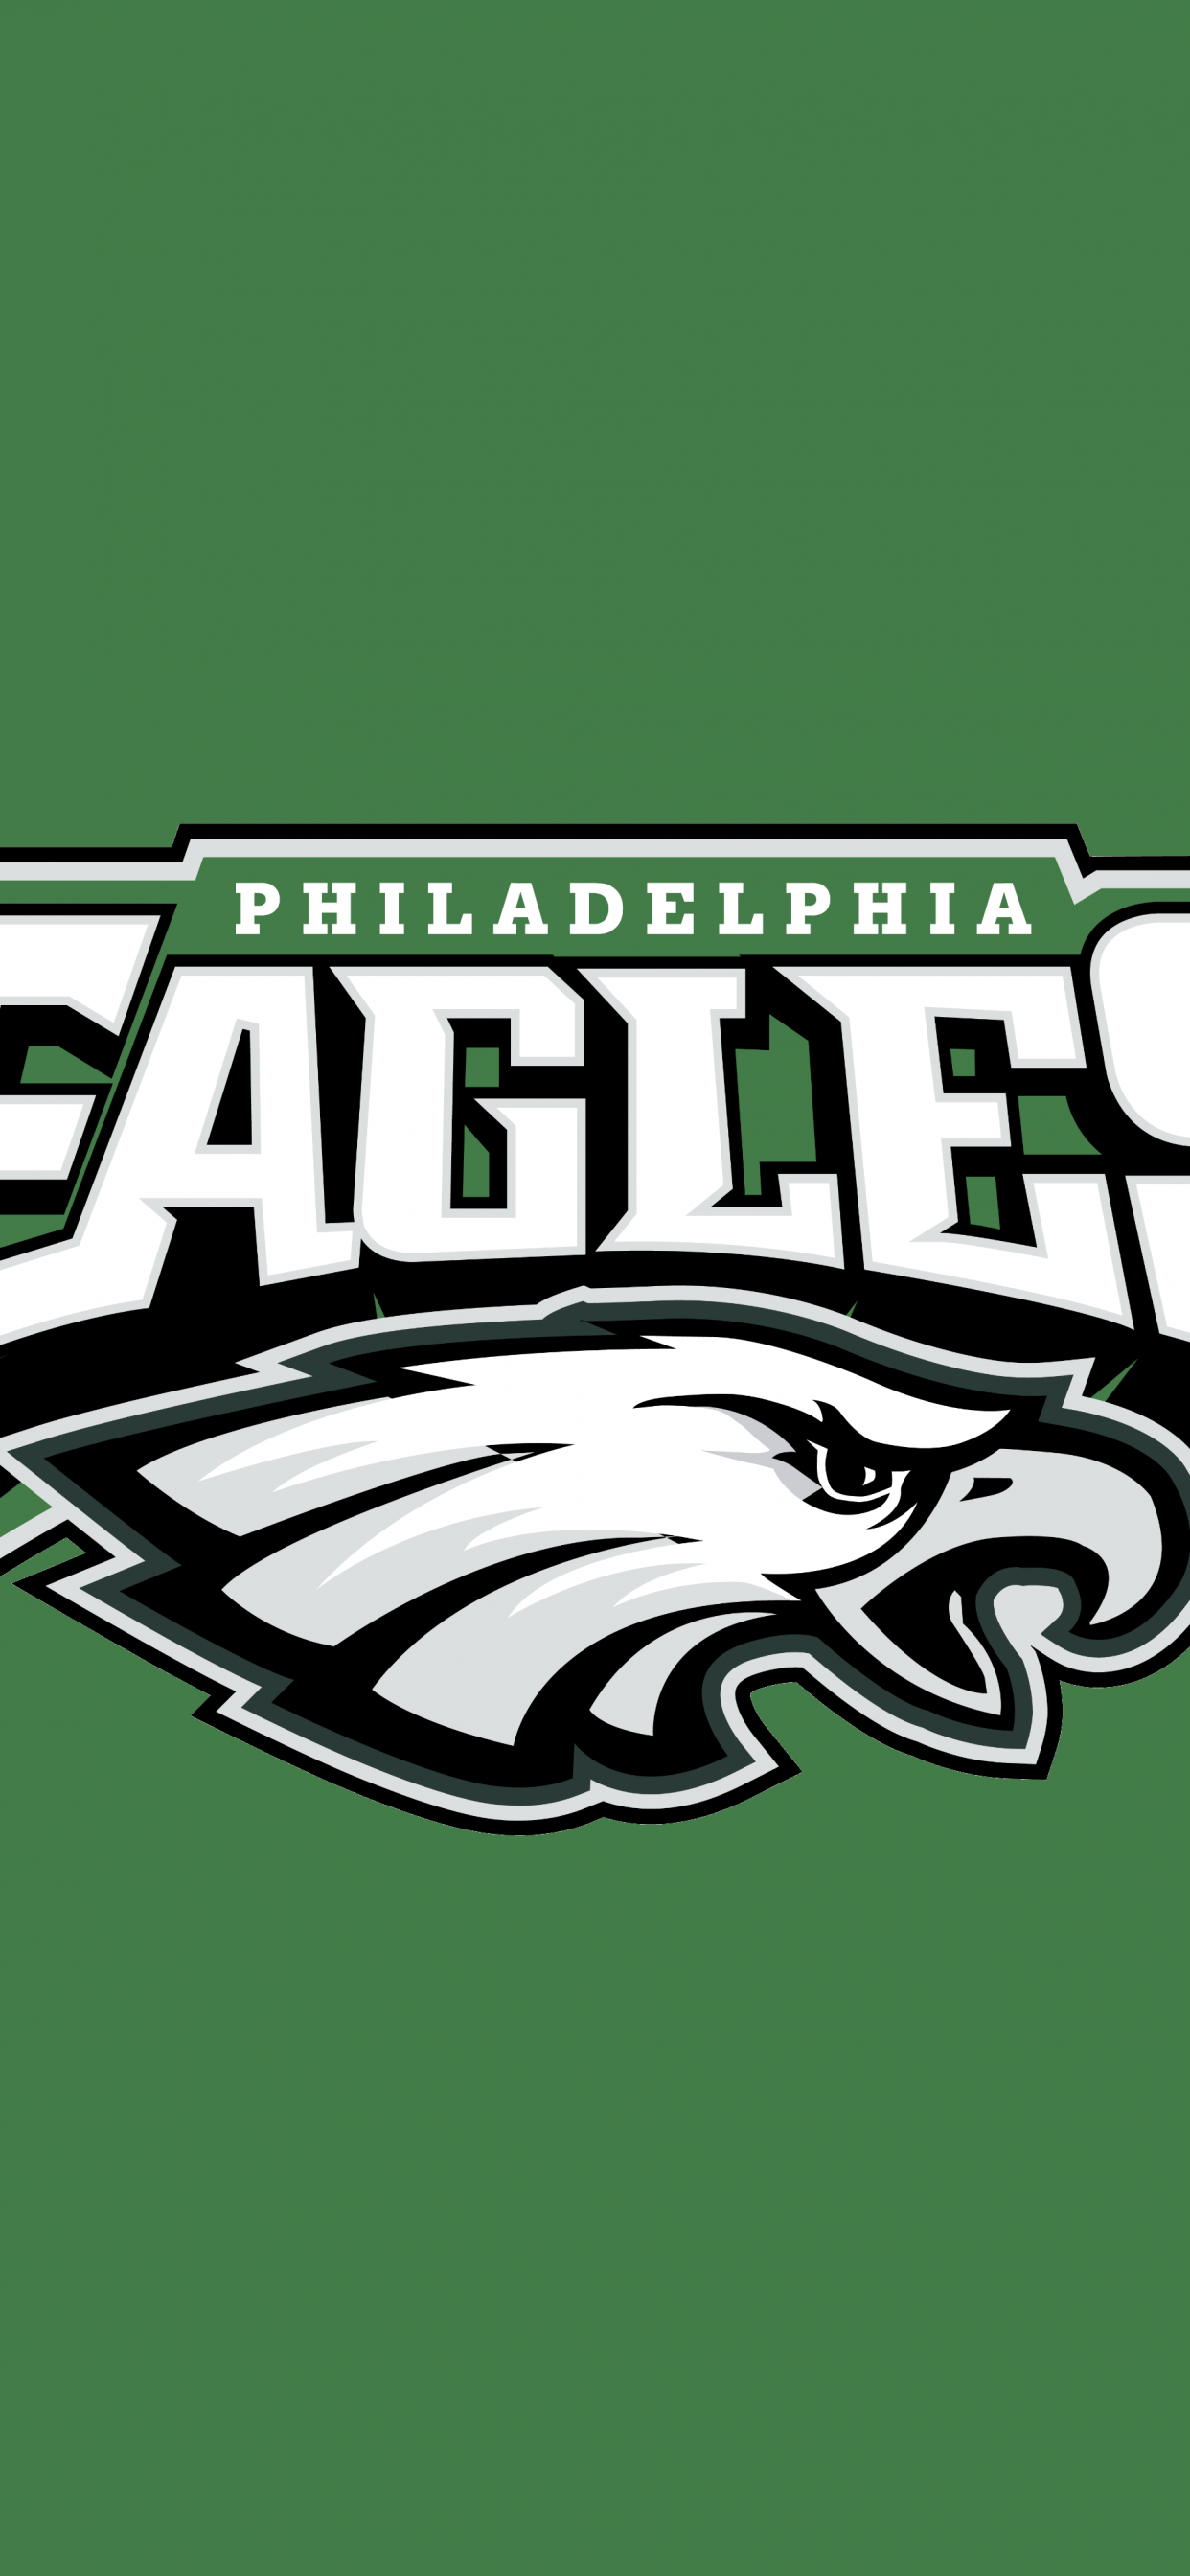 Eagles iPhone Wallpapers - Top Free